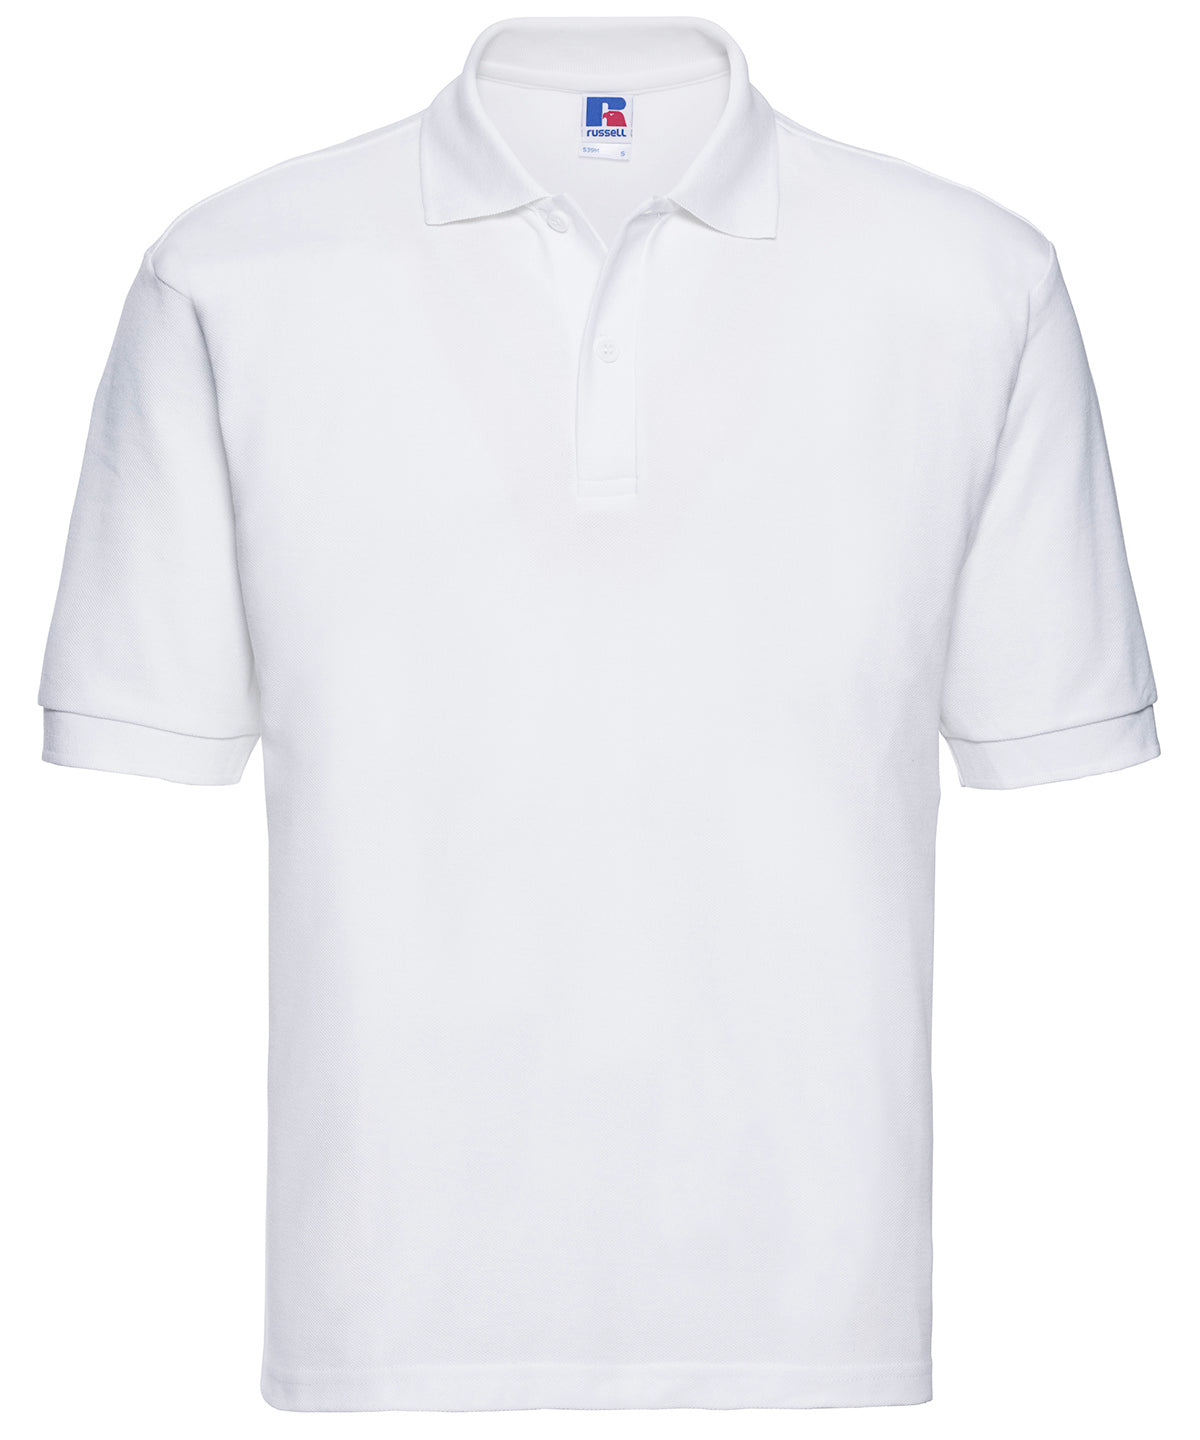 Personalised Polo Shirts - Bottle Russell Europe Classic polycotton polo